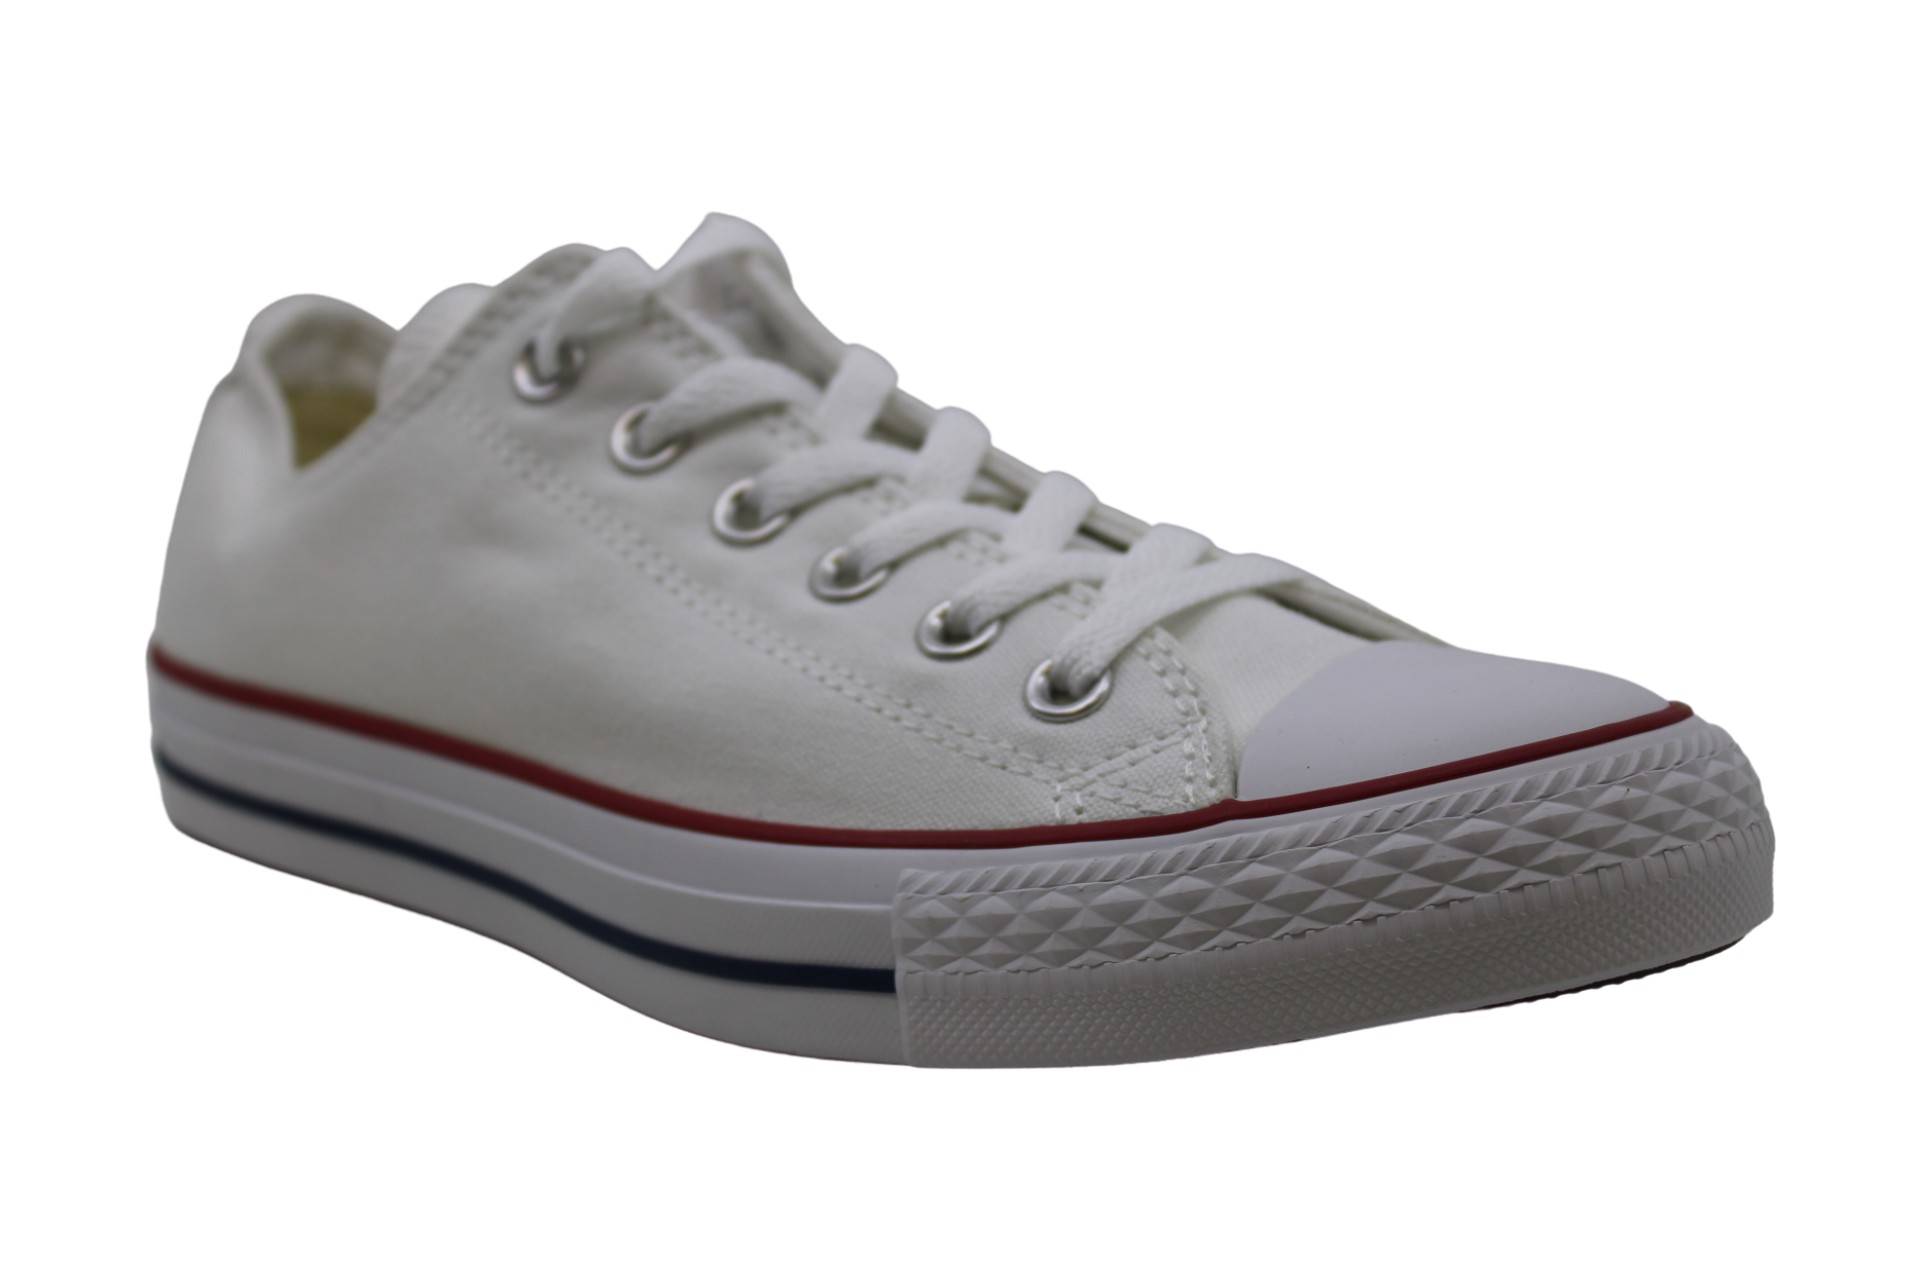 Converse Men's Shoes allstar Fabric Low Top Lace Up, Opal White, Size 9 ...